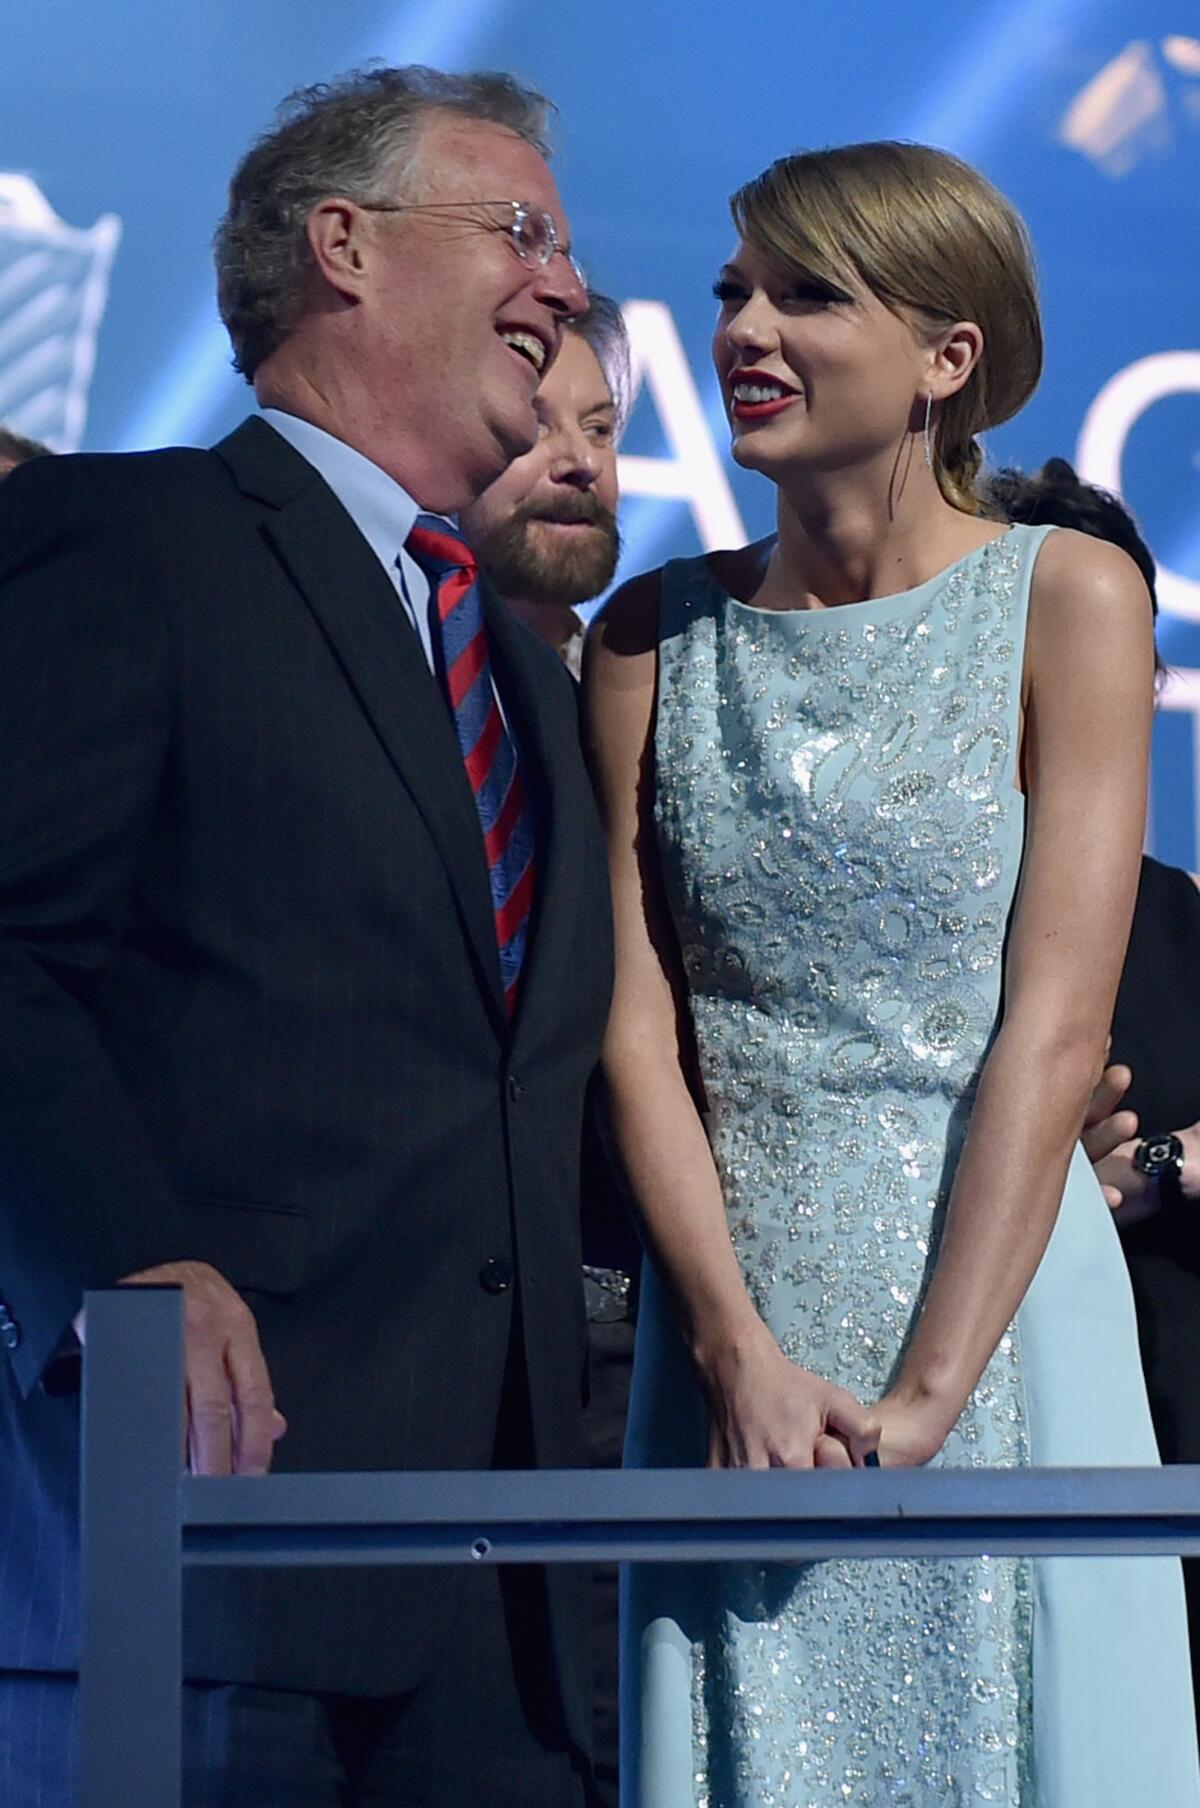 Scott Swift and his daughter Taylor Swift wear formalwear while smiling at each other behind a railing